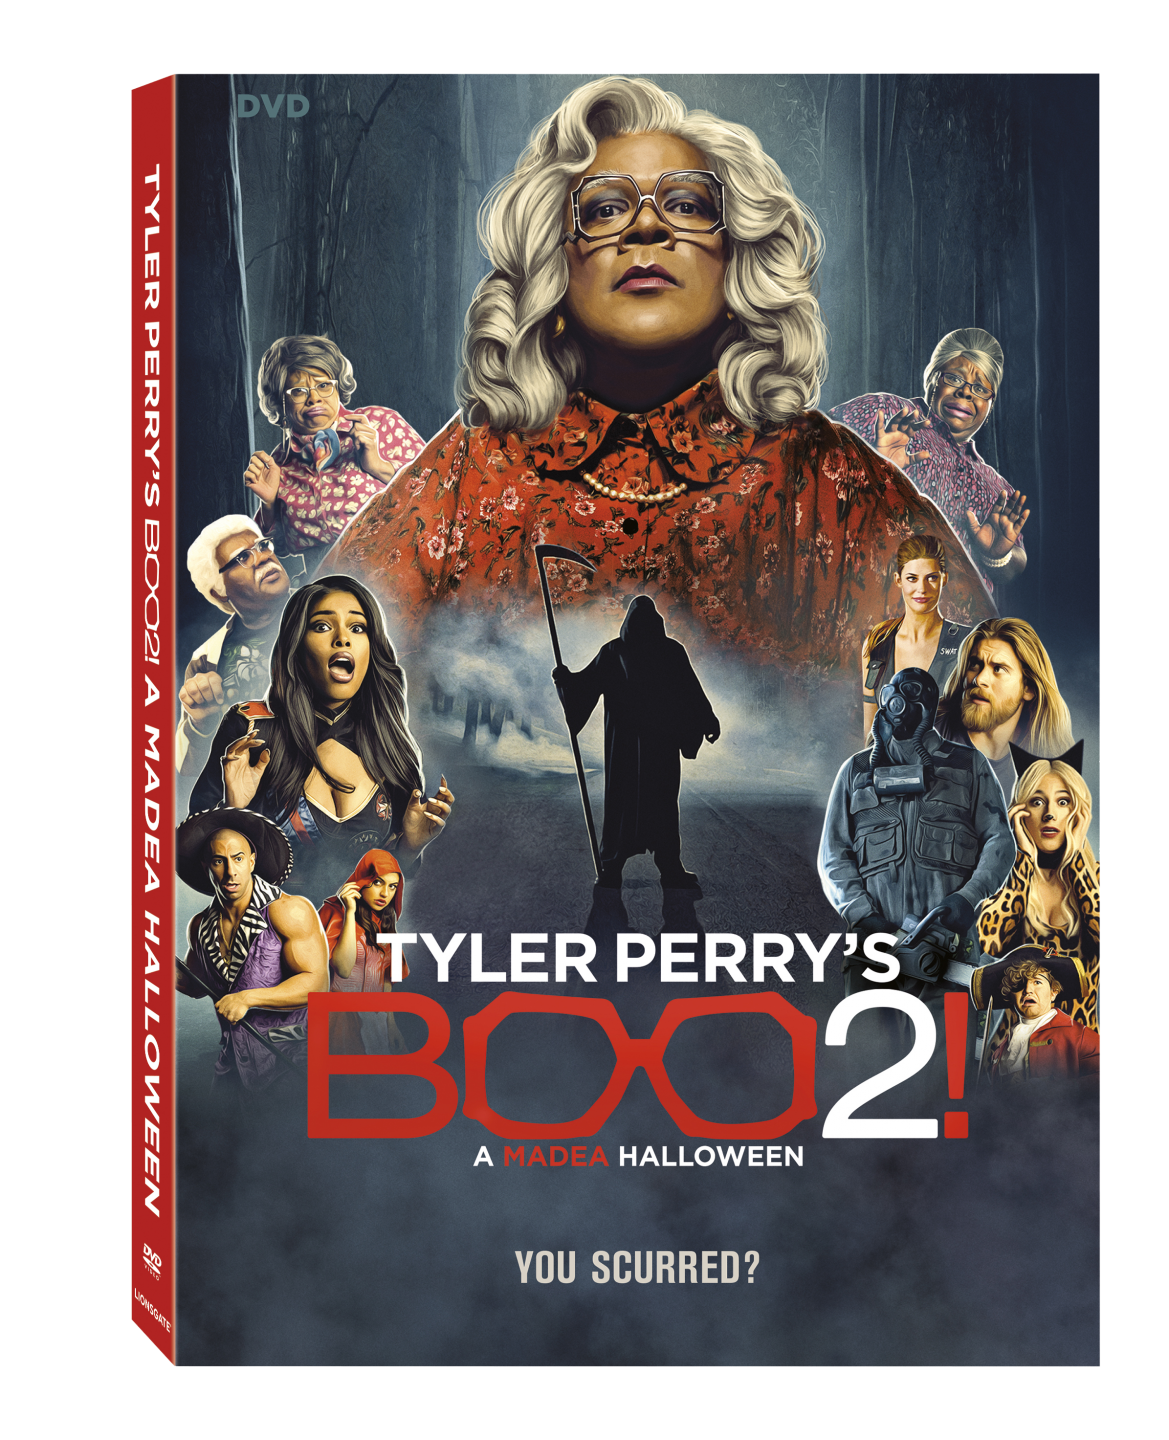 Tyler Perry's Boo 2! A Madea Halloween DVD Cover (Lionsgagte Home Entertainment)